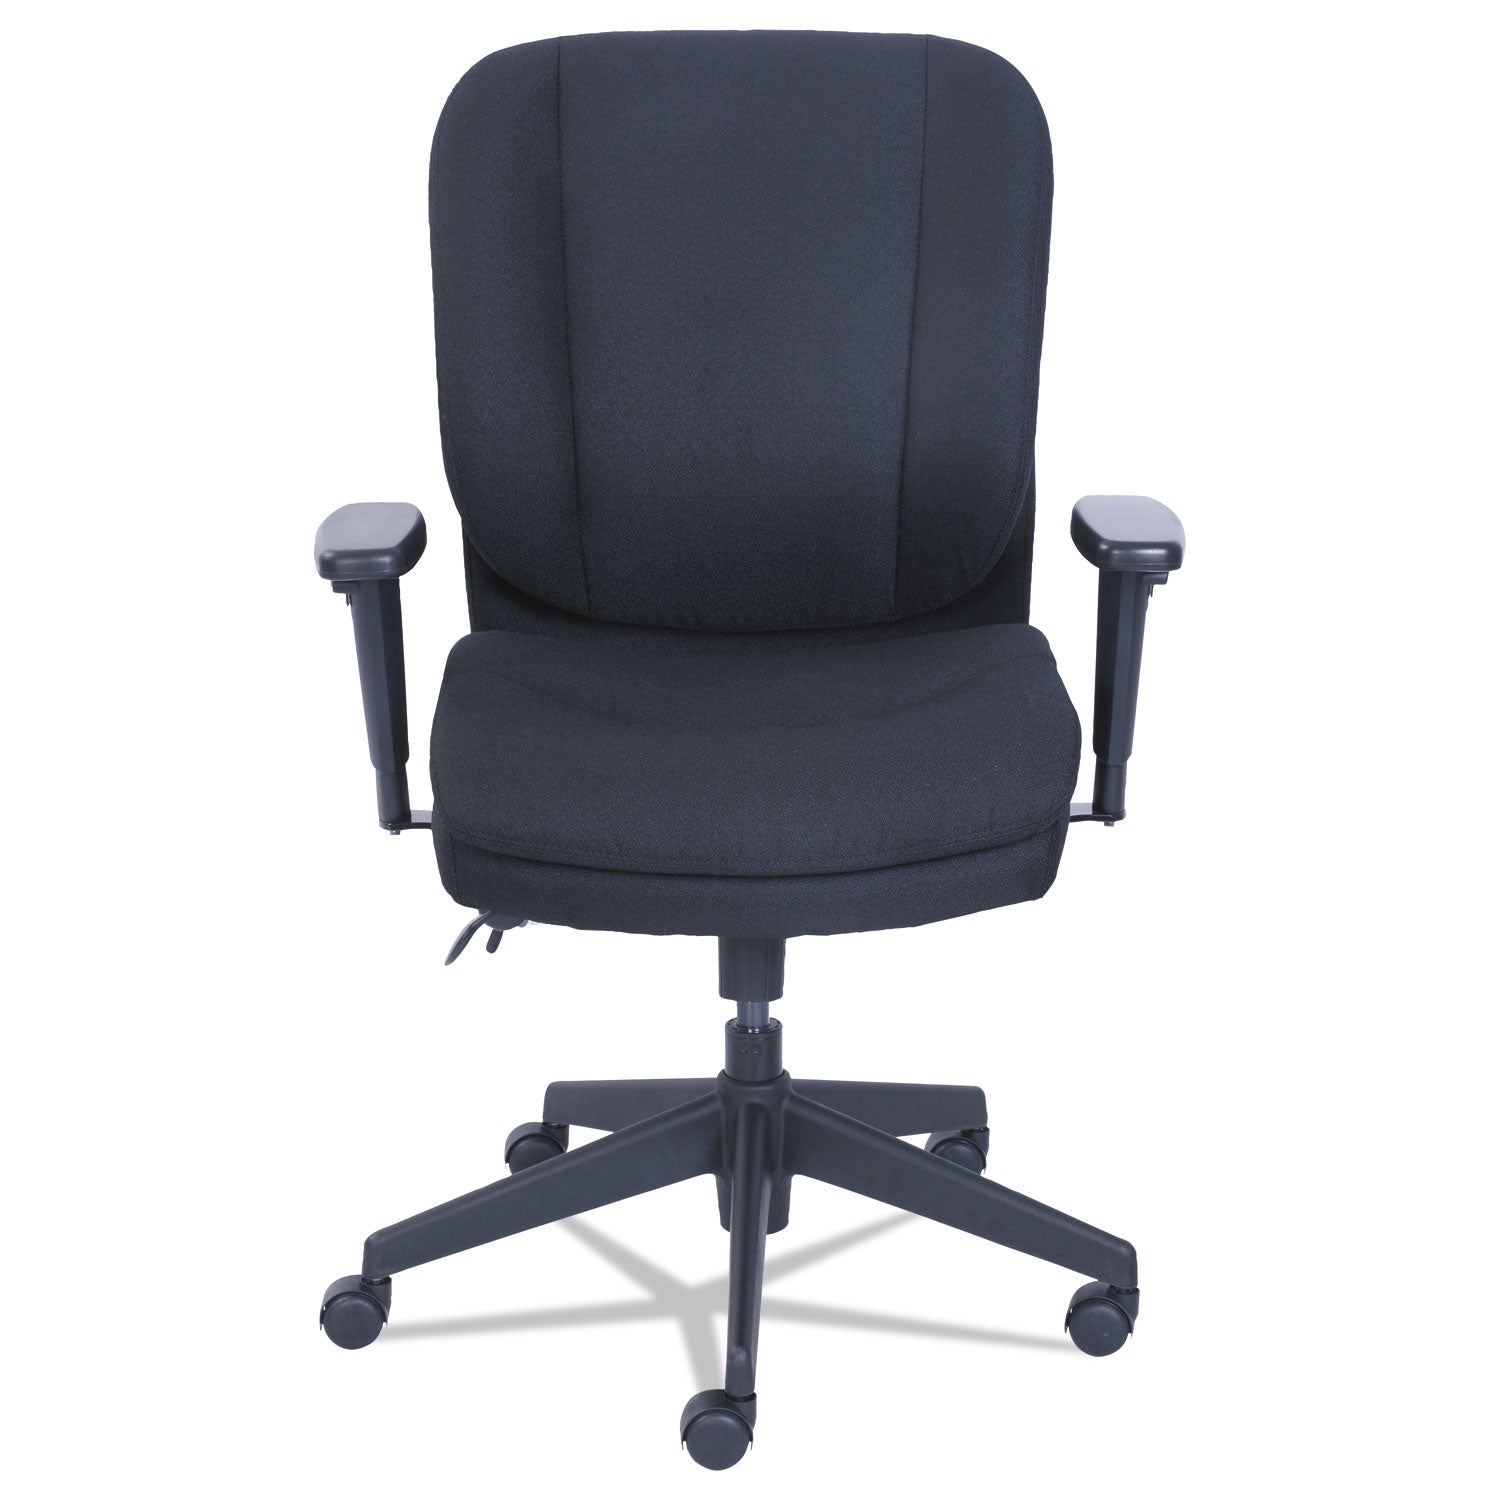 cosset-ergonomic-task-chair-supports-up-to-275-lb-195-to-225-seat-height-black_srj48967a - 4